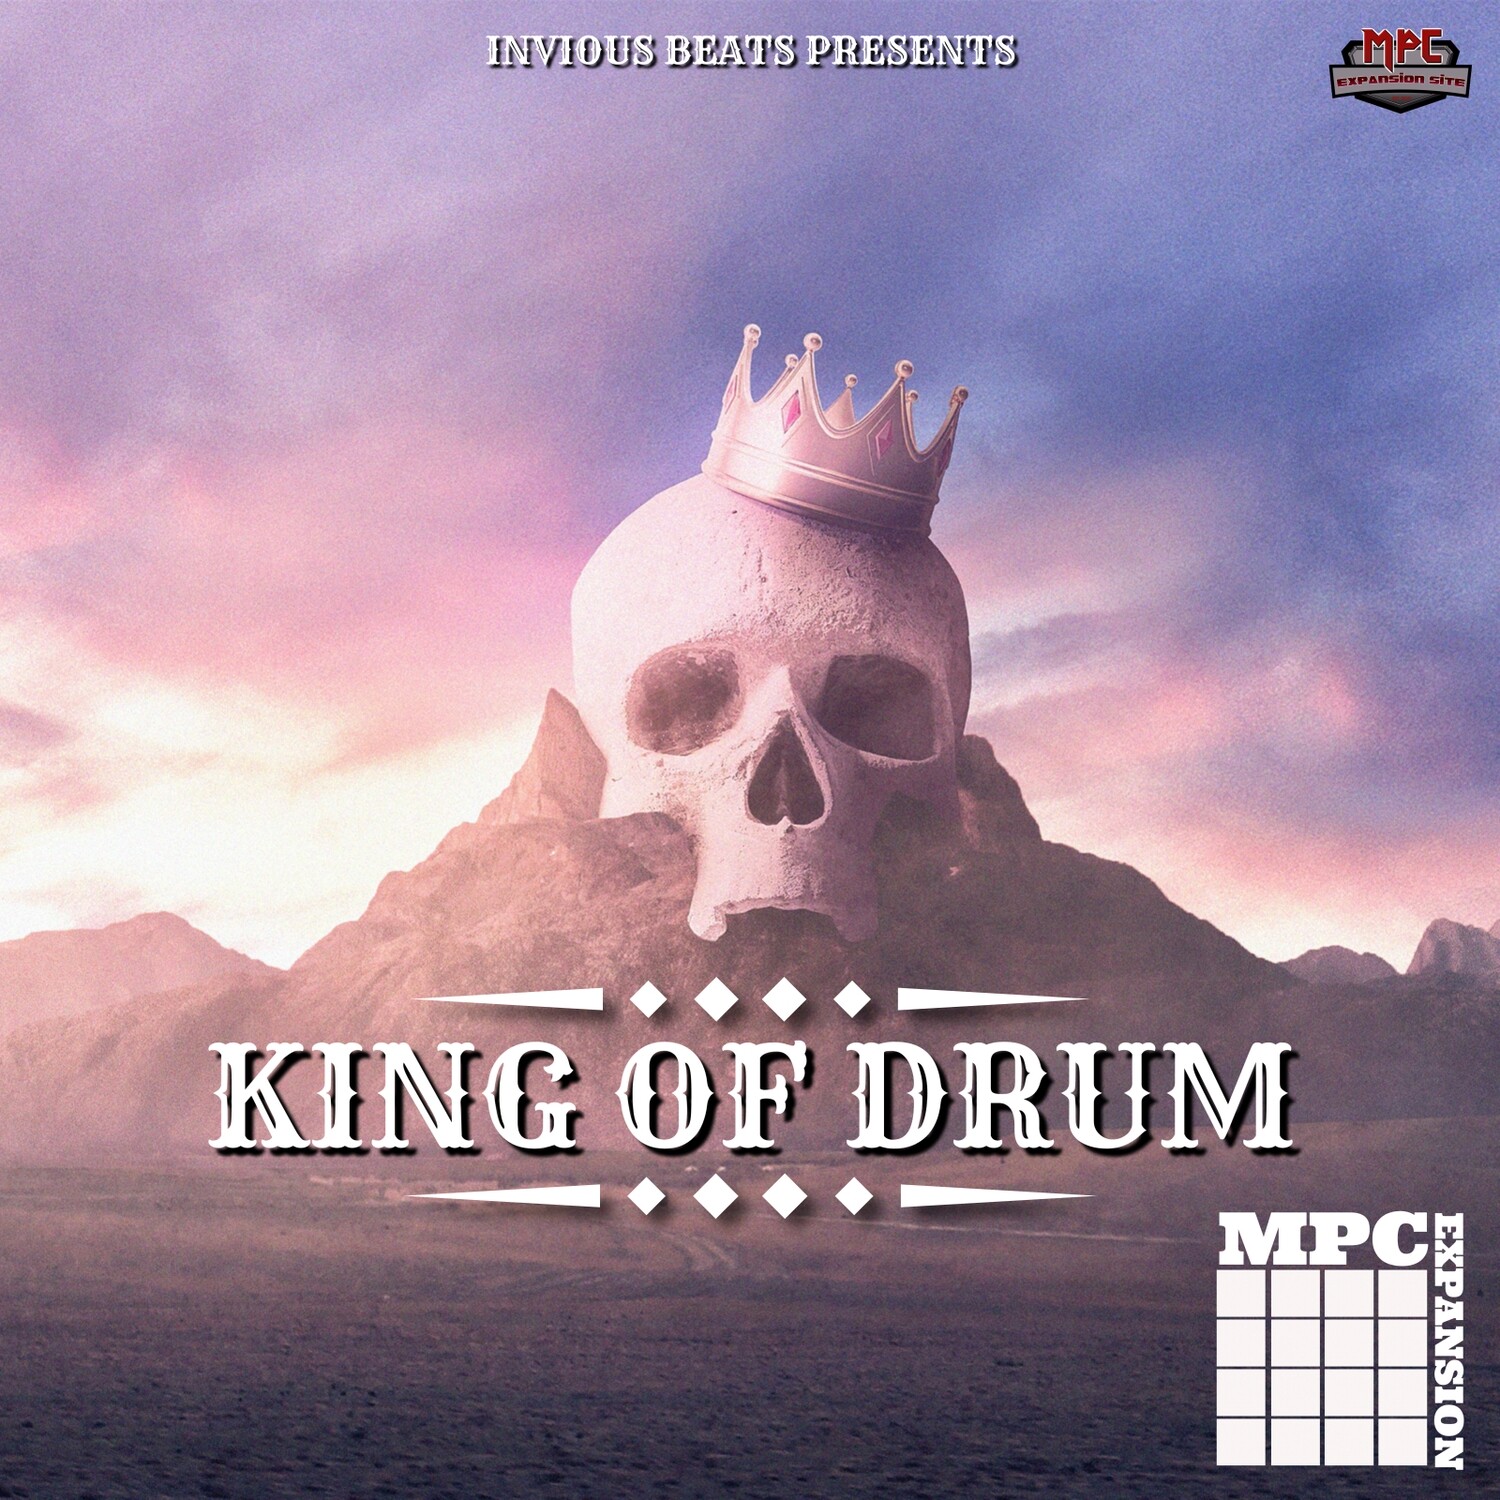 MPC EXPANSION 'KING OF DRUM' by INVIOUS